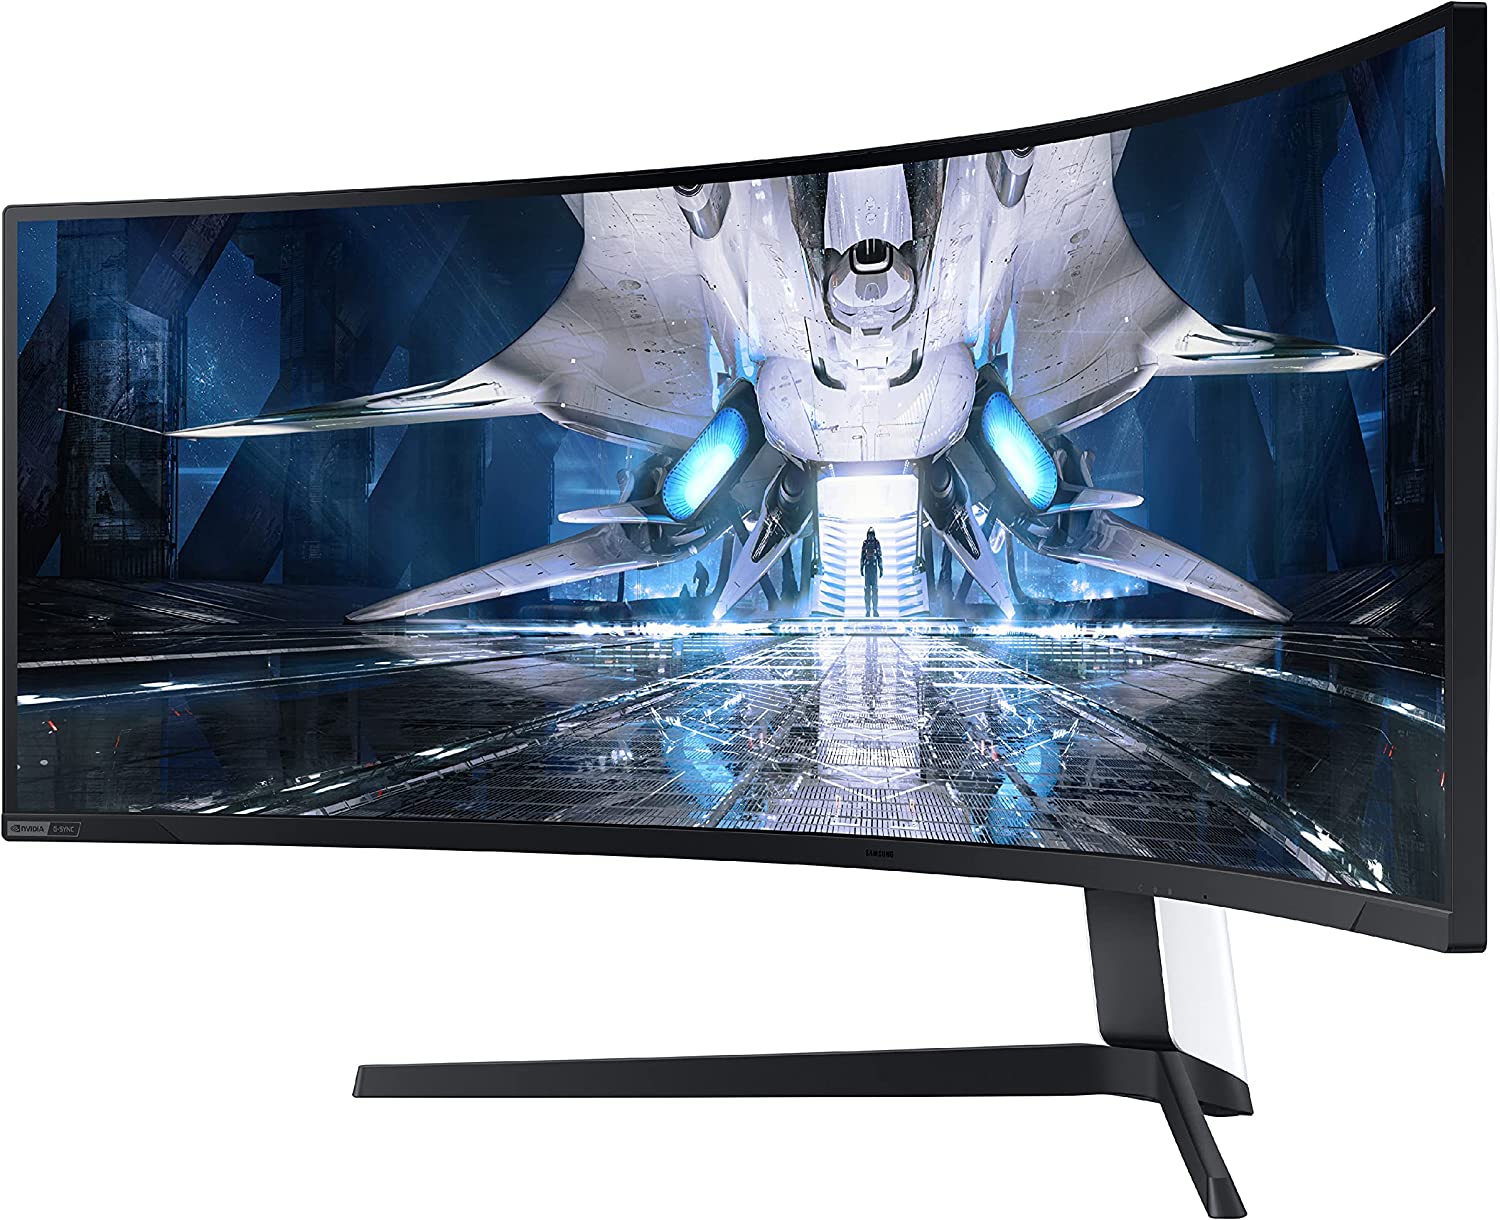 Samsung 49-Inch Curved Gaming Monitor Is Now on Sale for Almost $1,000 Off, But Still Cheaper at Amazon